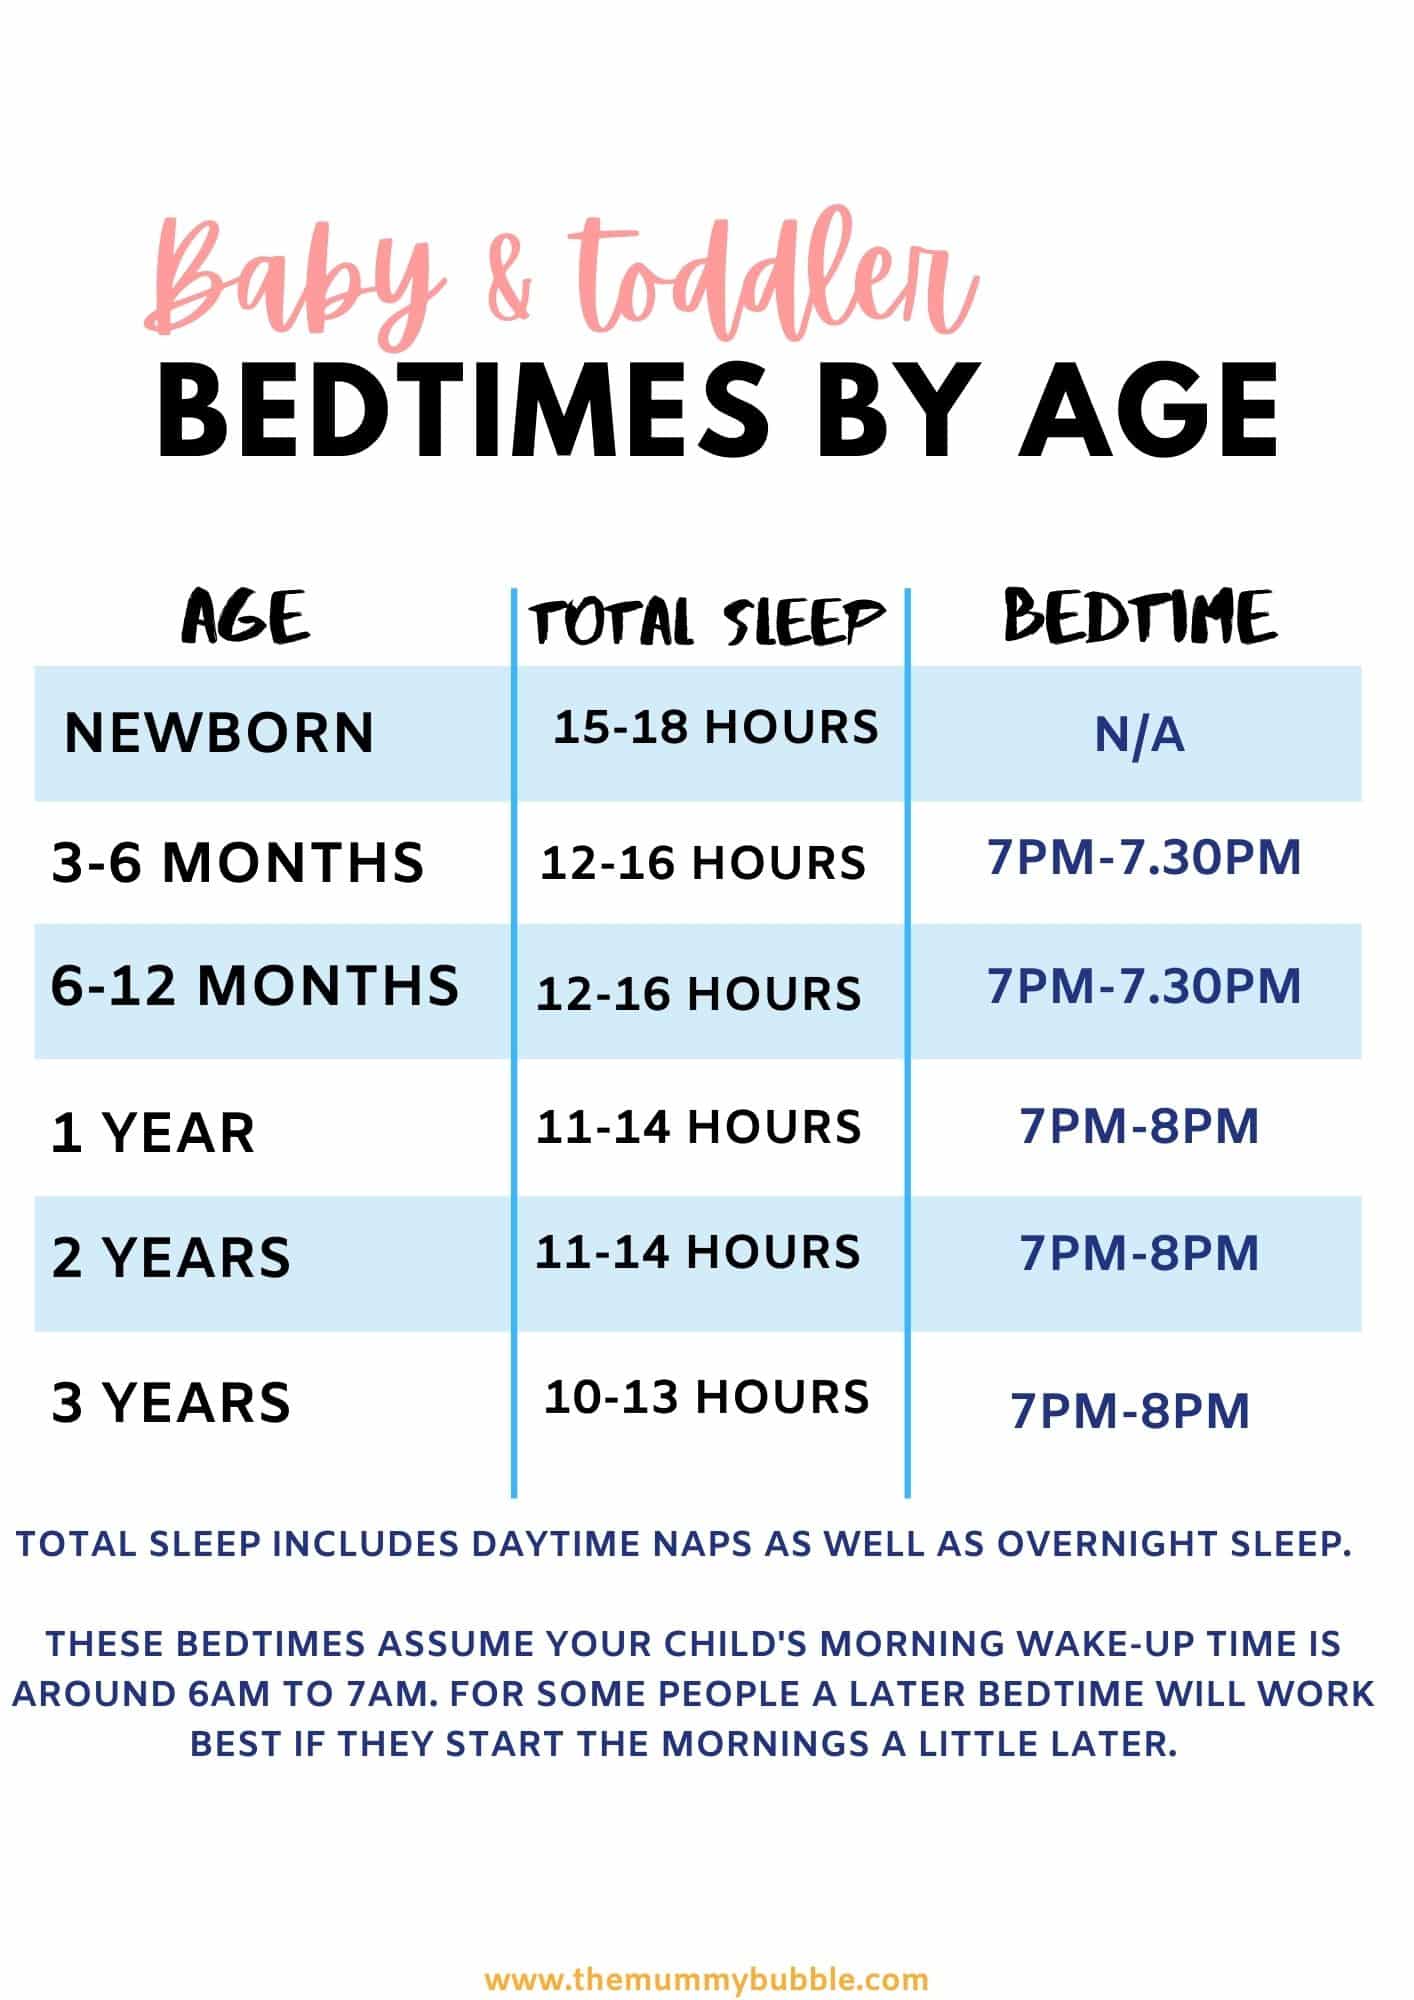 What age is 7pm bedtime?